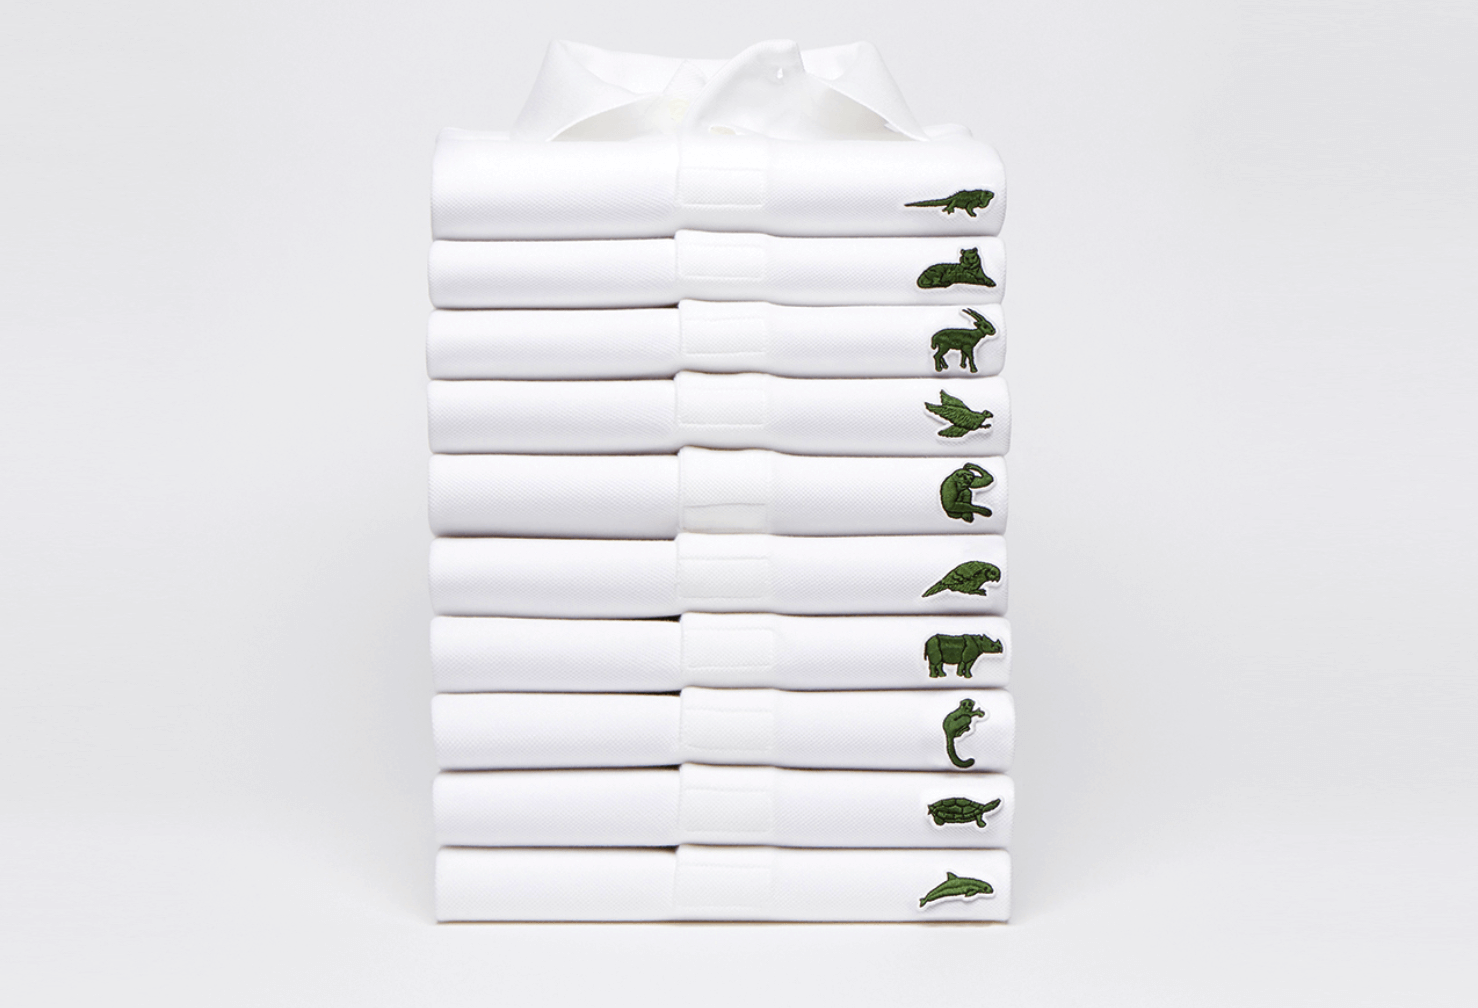 Lacoste Highlights Endangered in Polo Line